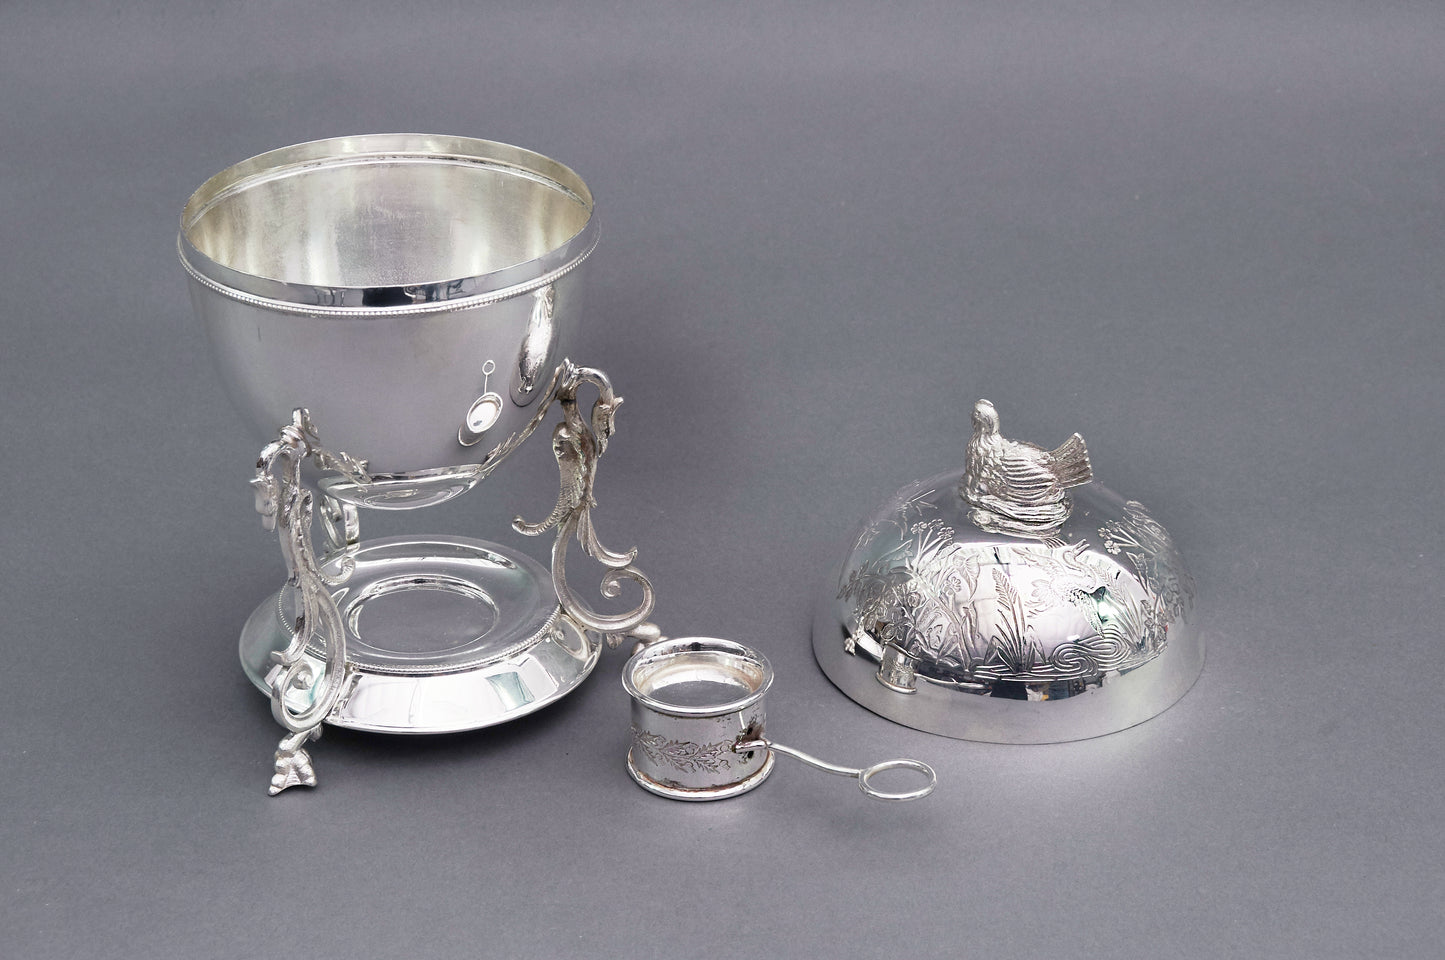 The Groom Ivan - Antique Silver Plated Egg Coddler With Chicken Top